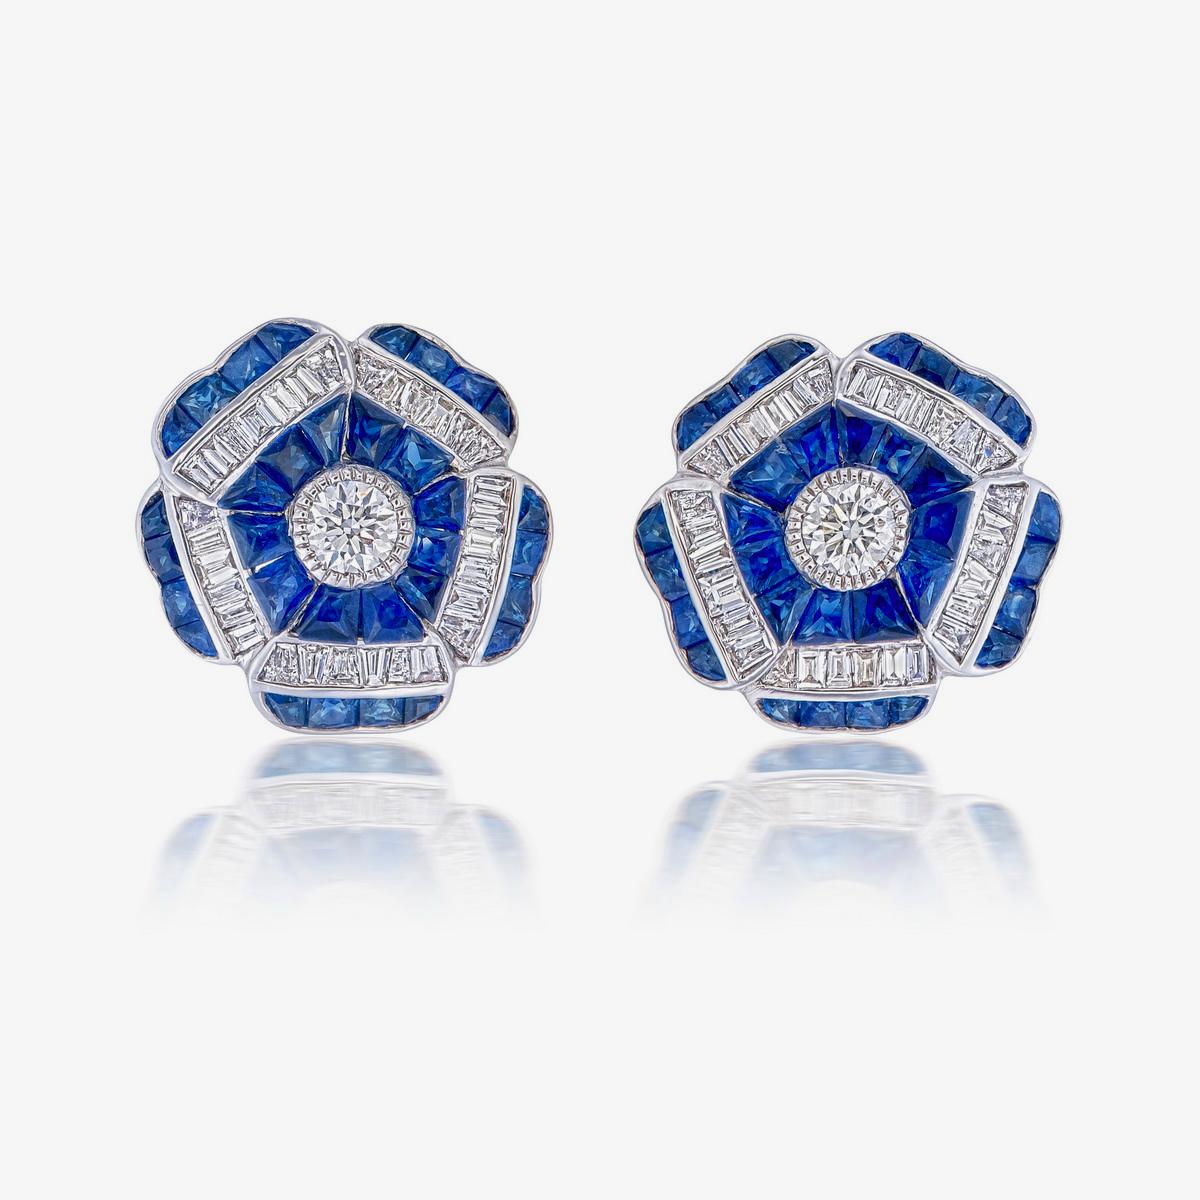 A pair of fine modern blue sapphire and diamond floral earrings made in 18 Karat gold. A great choice for lifestyle wear.
- There are two center diamonds with a total weight of 0.25 carats
- There are sixty-one tapered-baguette supporting diamonds